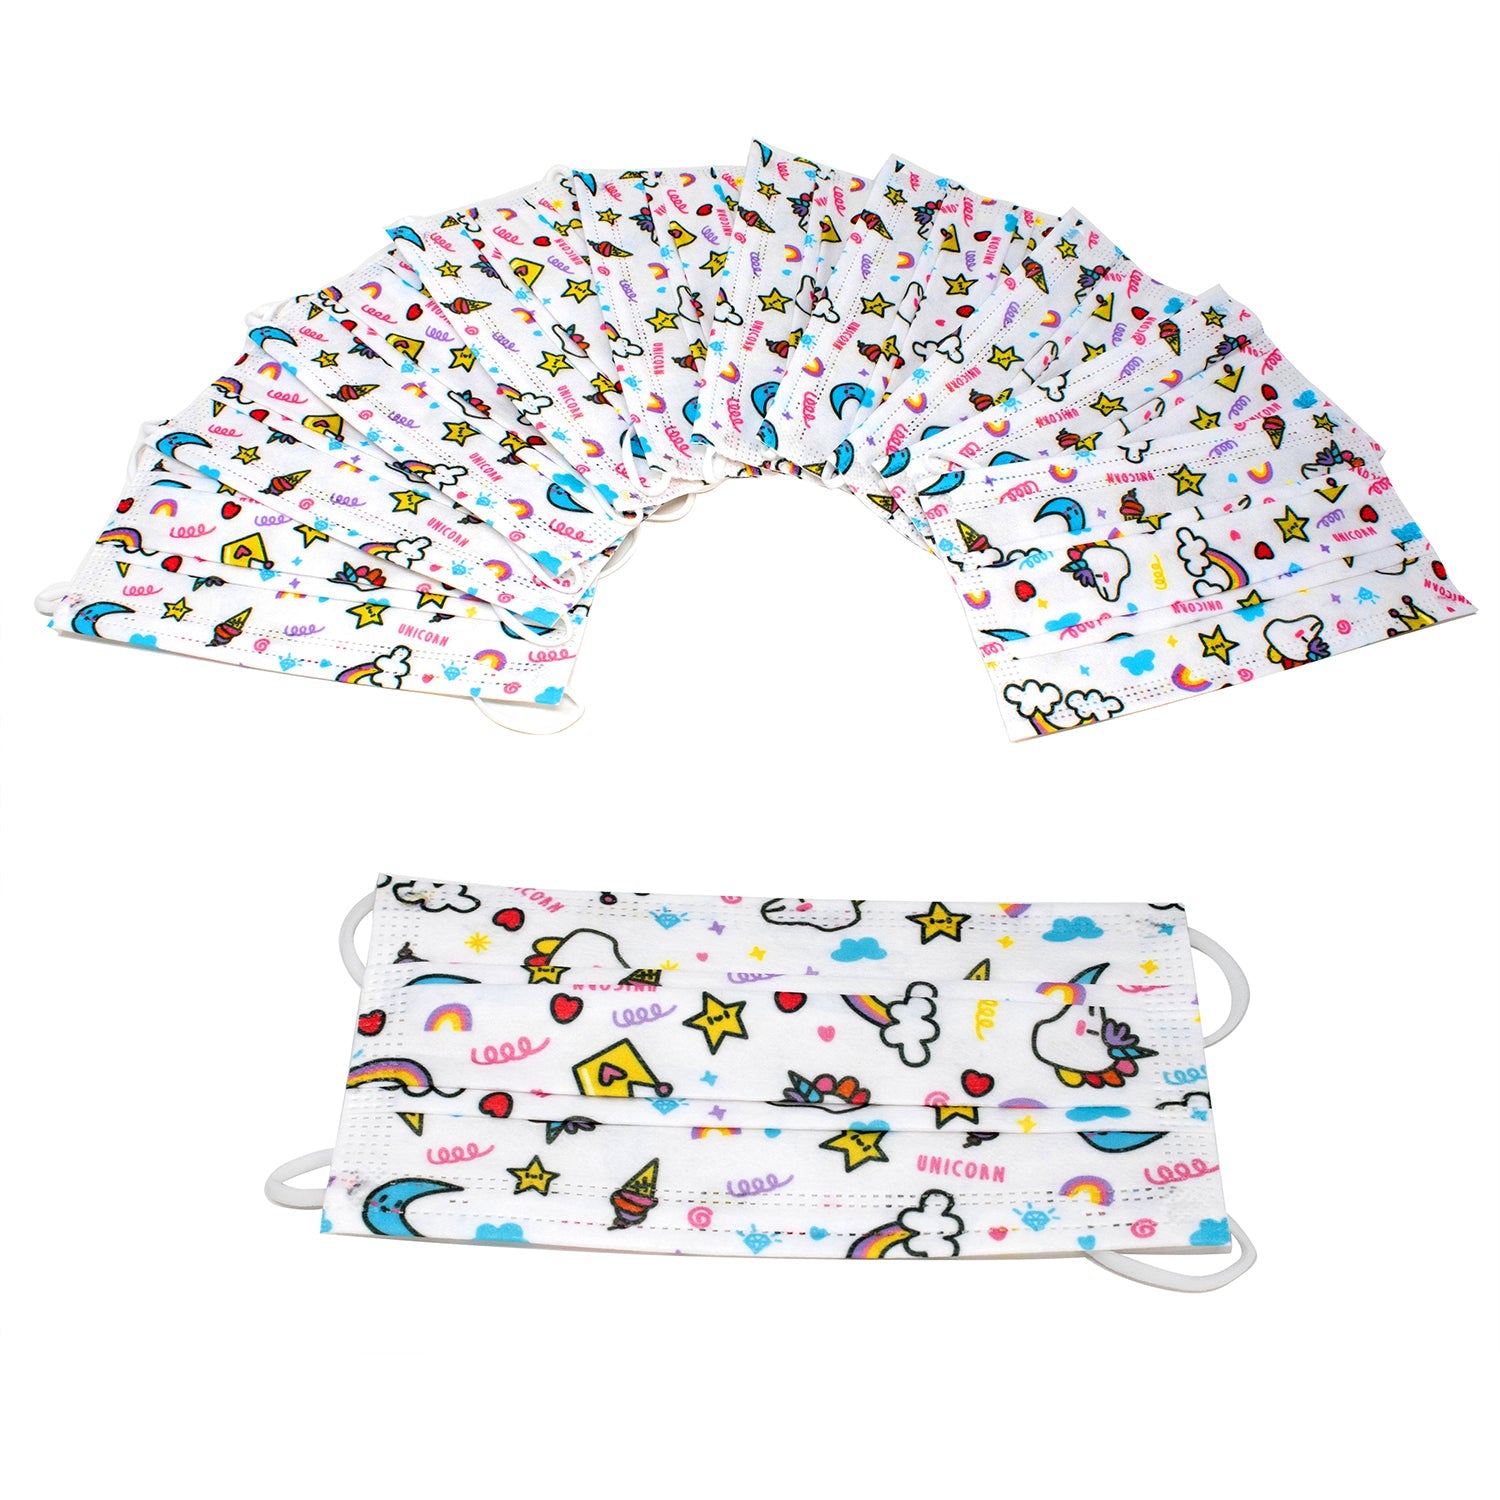 Disposable Print Masks 10 Pack. With a variety of colored prints, these masks are perfect for protecting yourself while keeping a sense of style. Colorful fabric surgical masks.